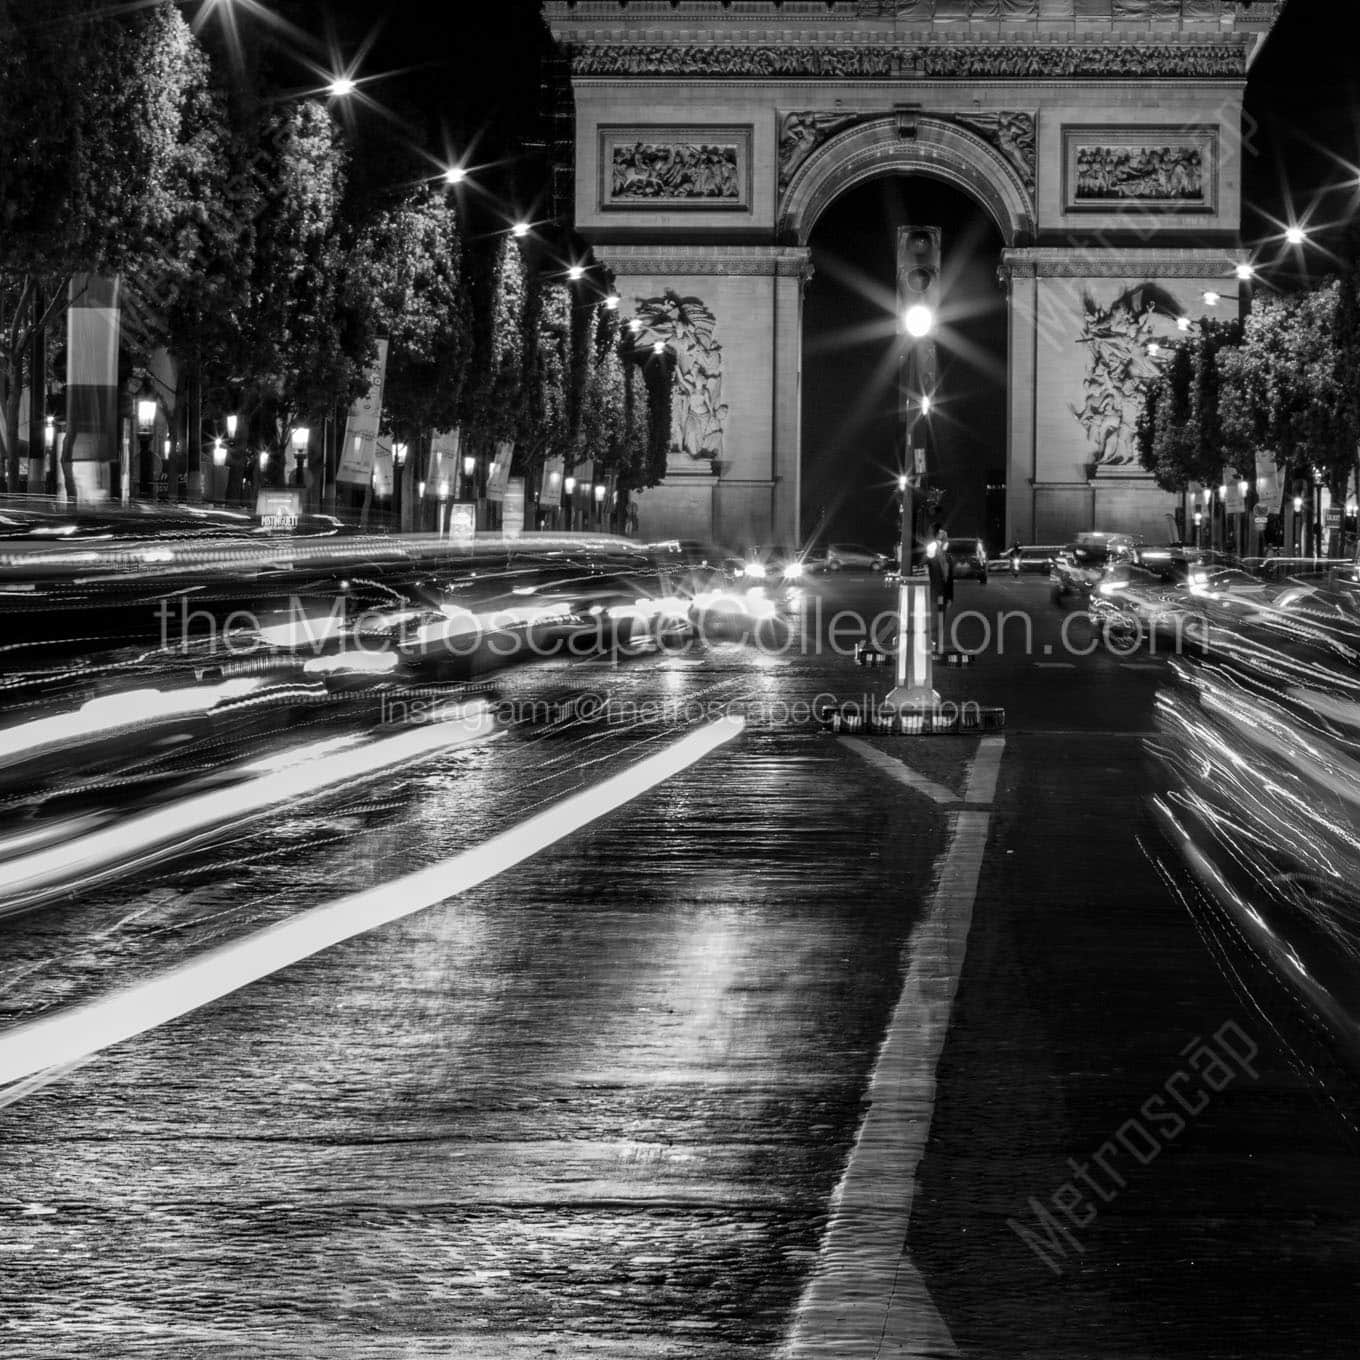 arc de triomphe on champs elysees at night Black & White Office Art